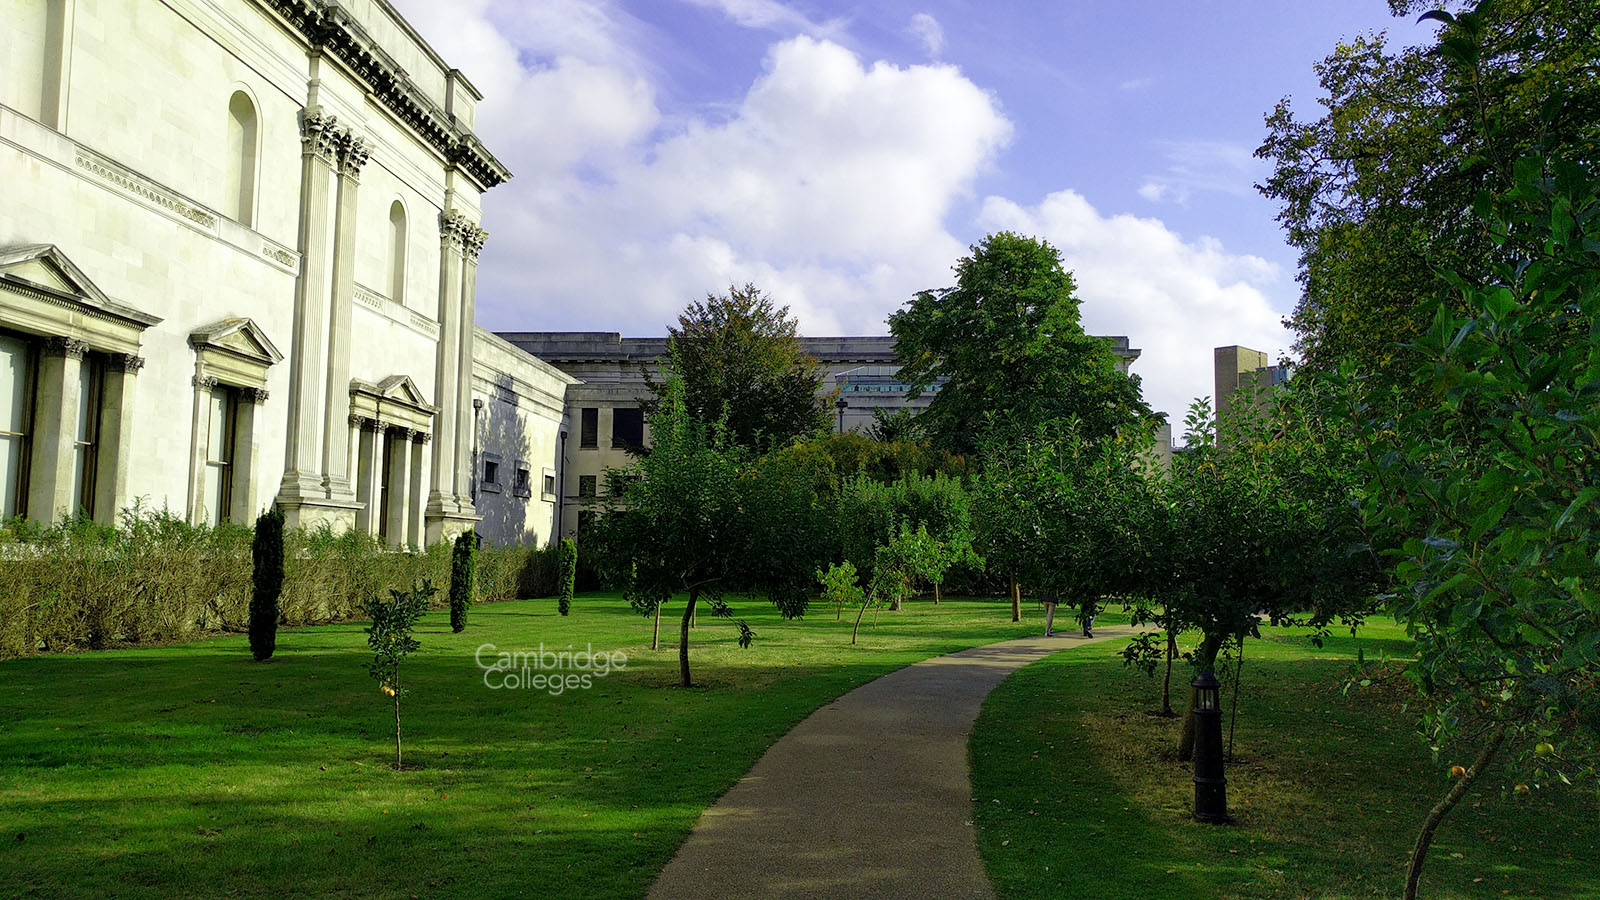 Peterhouse deer park with the Fitzwilliam museum